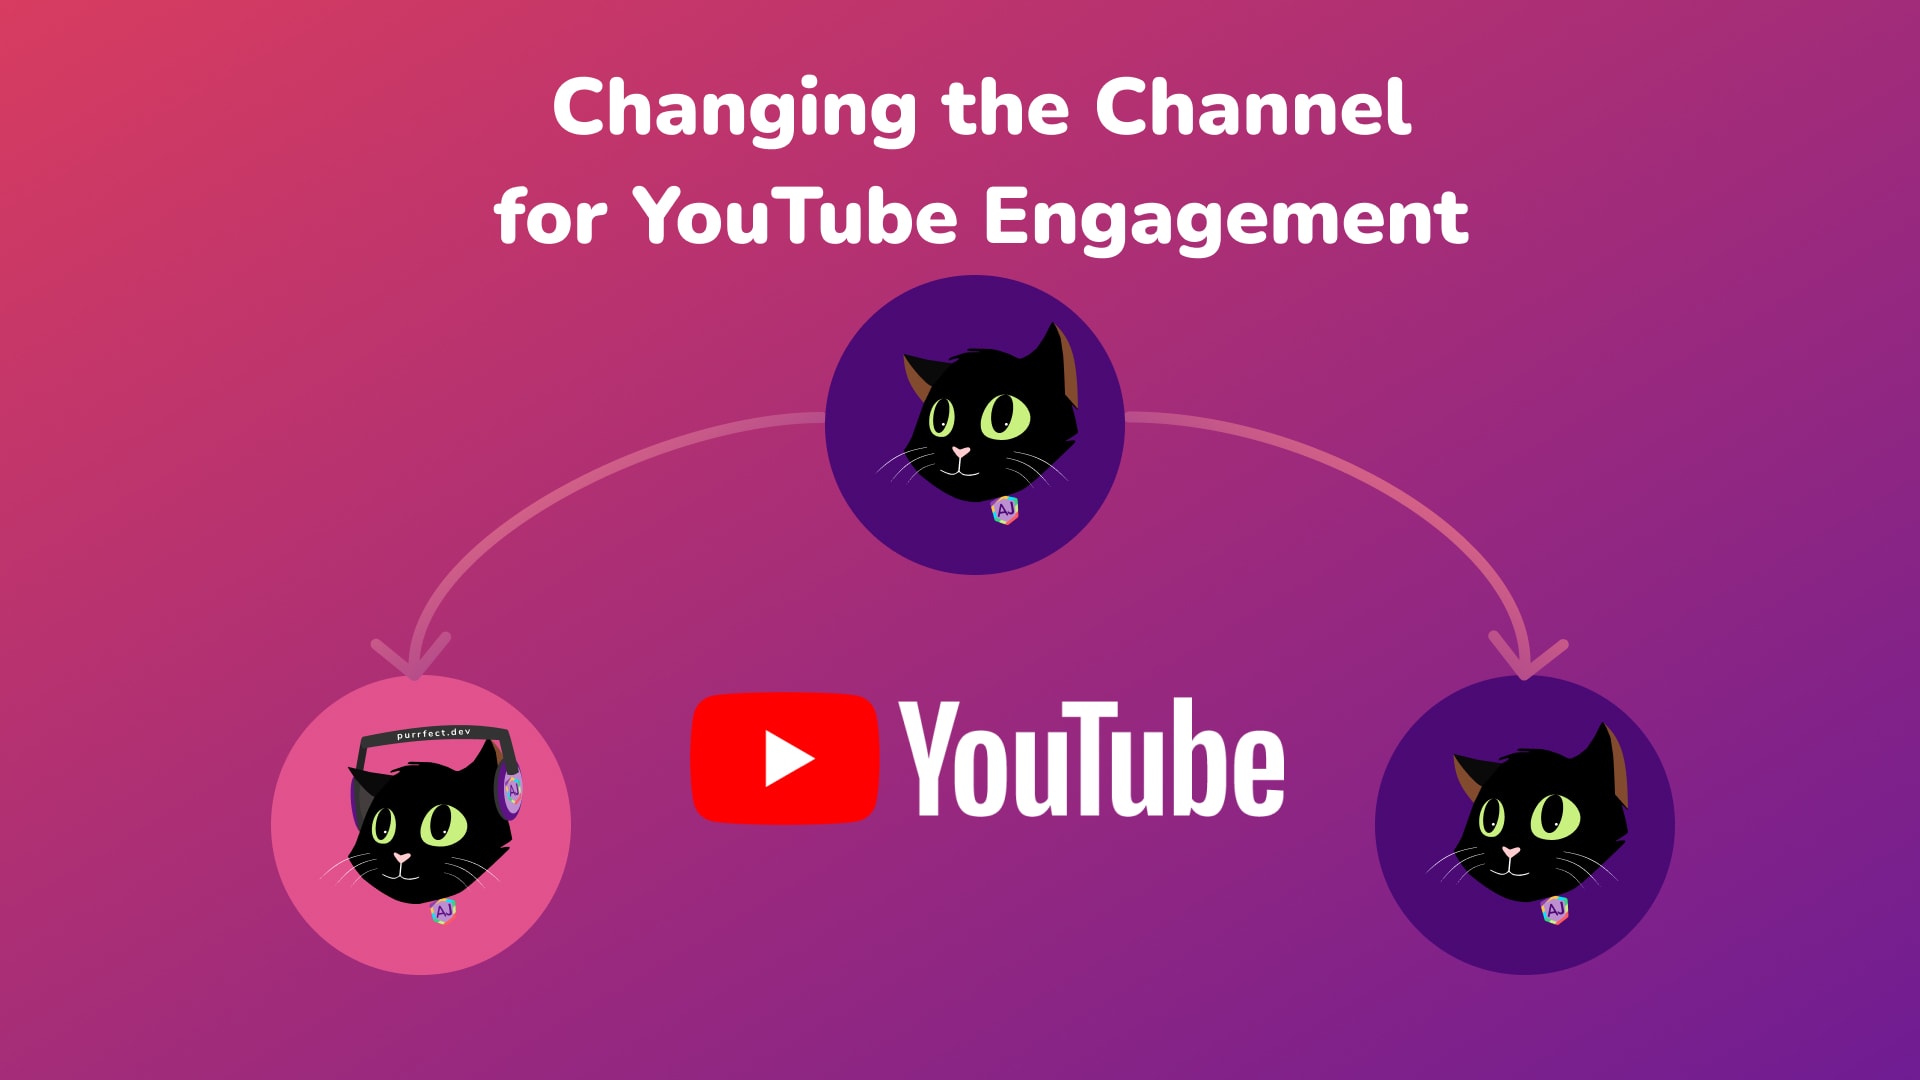 Changing the Channel for YouTube Engagement